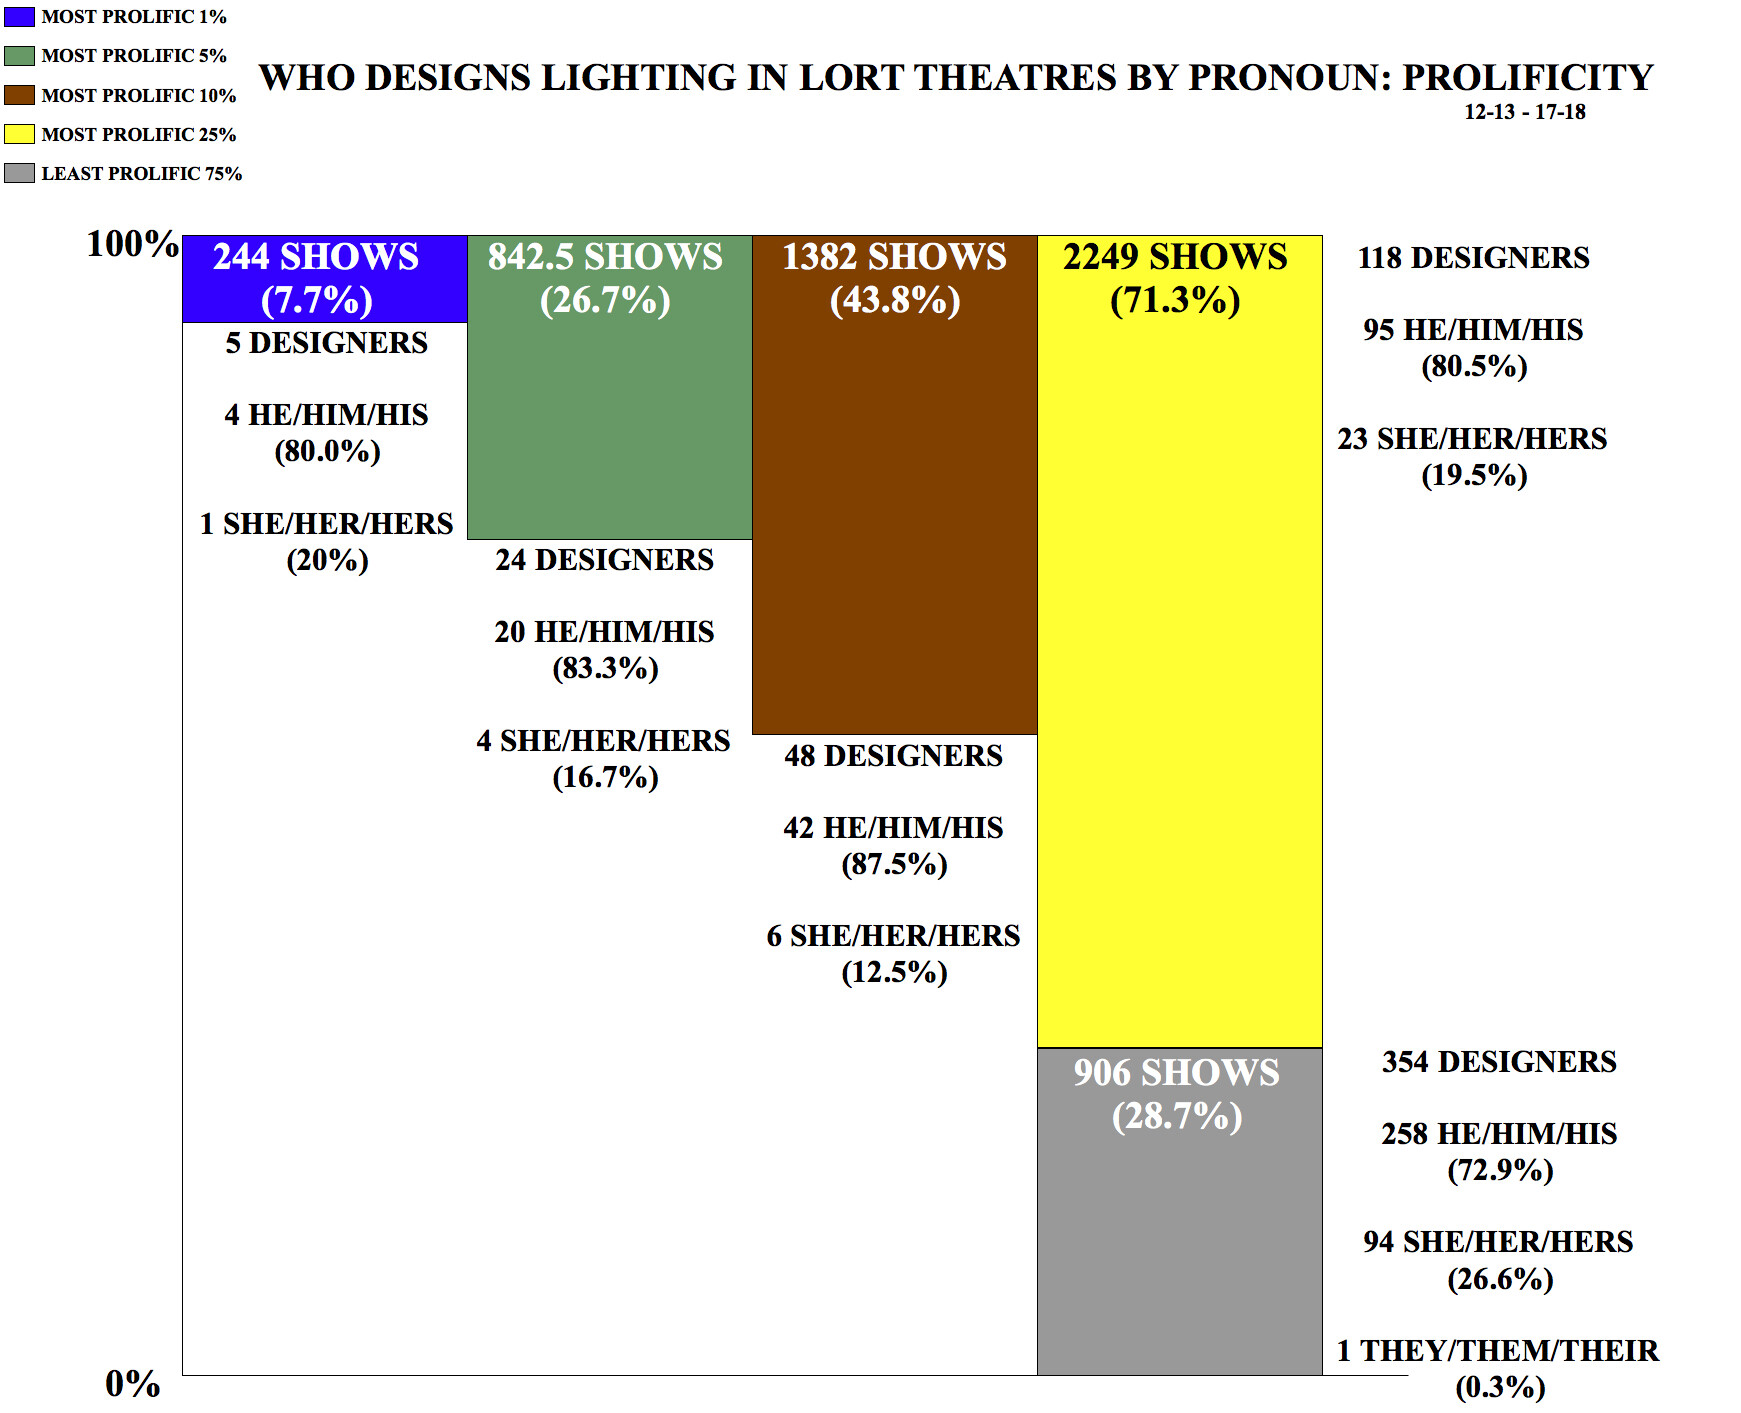 Who Designs Lighting in LORT Theatres by Pronoun: Prolificity